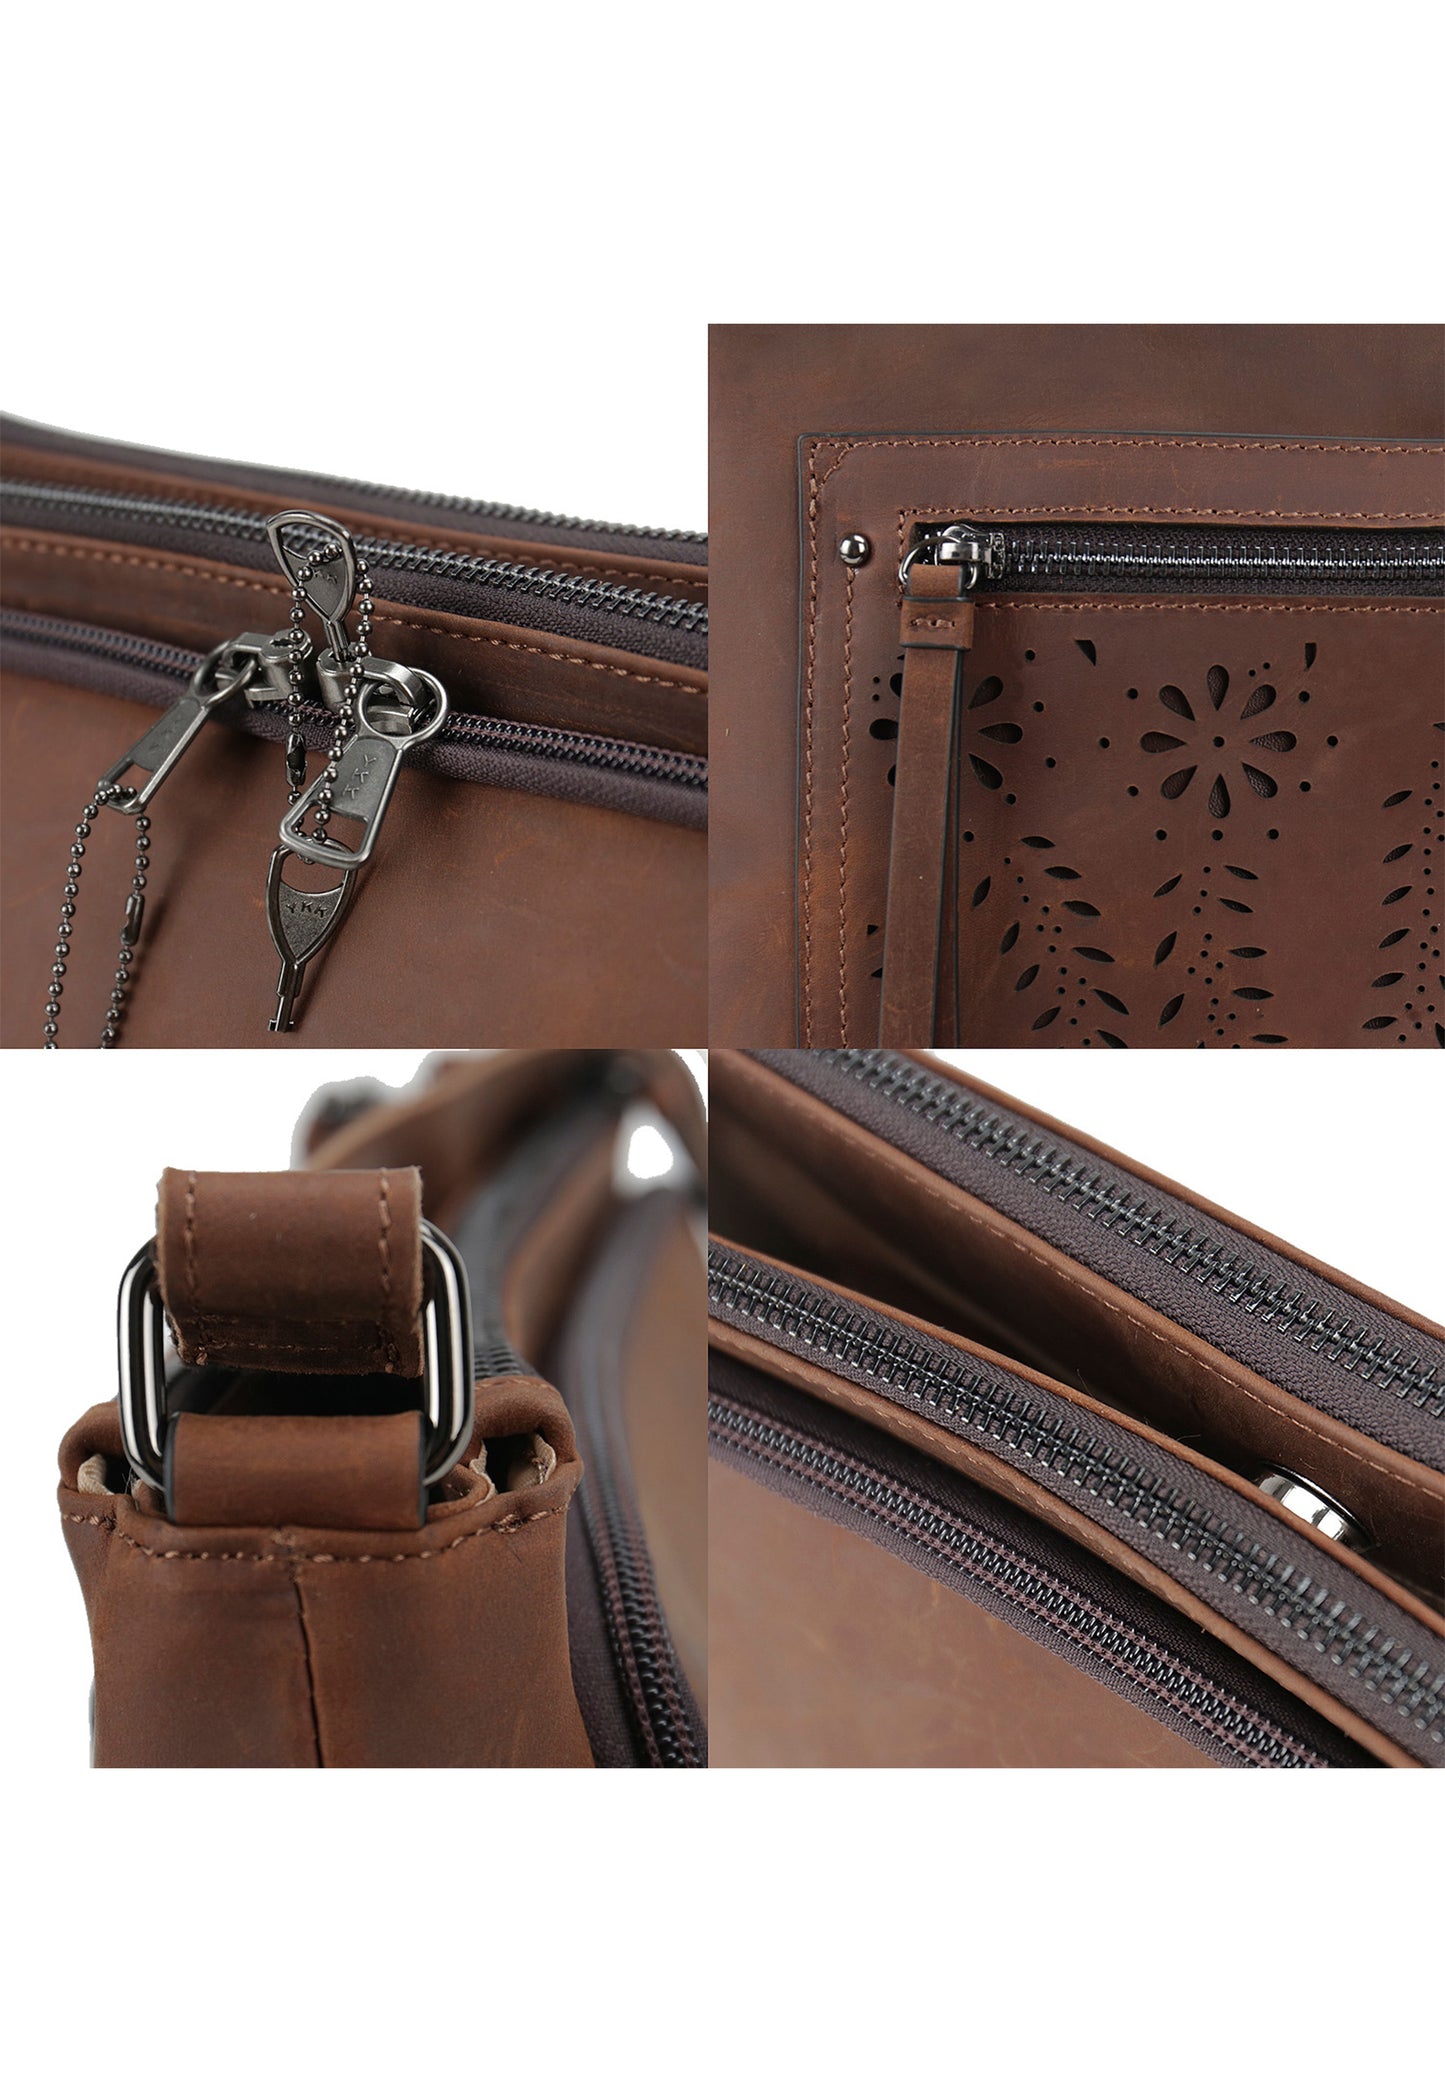 Multi view of concealed carry handbag